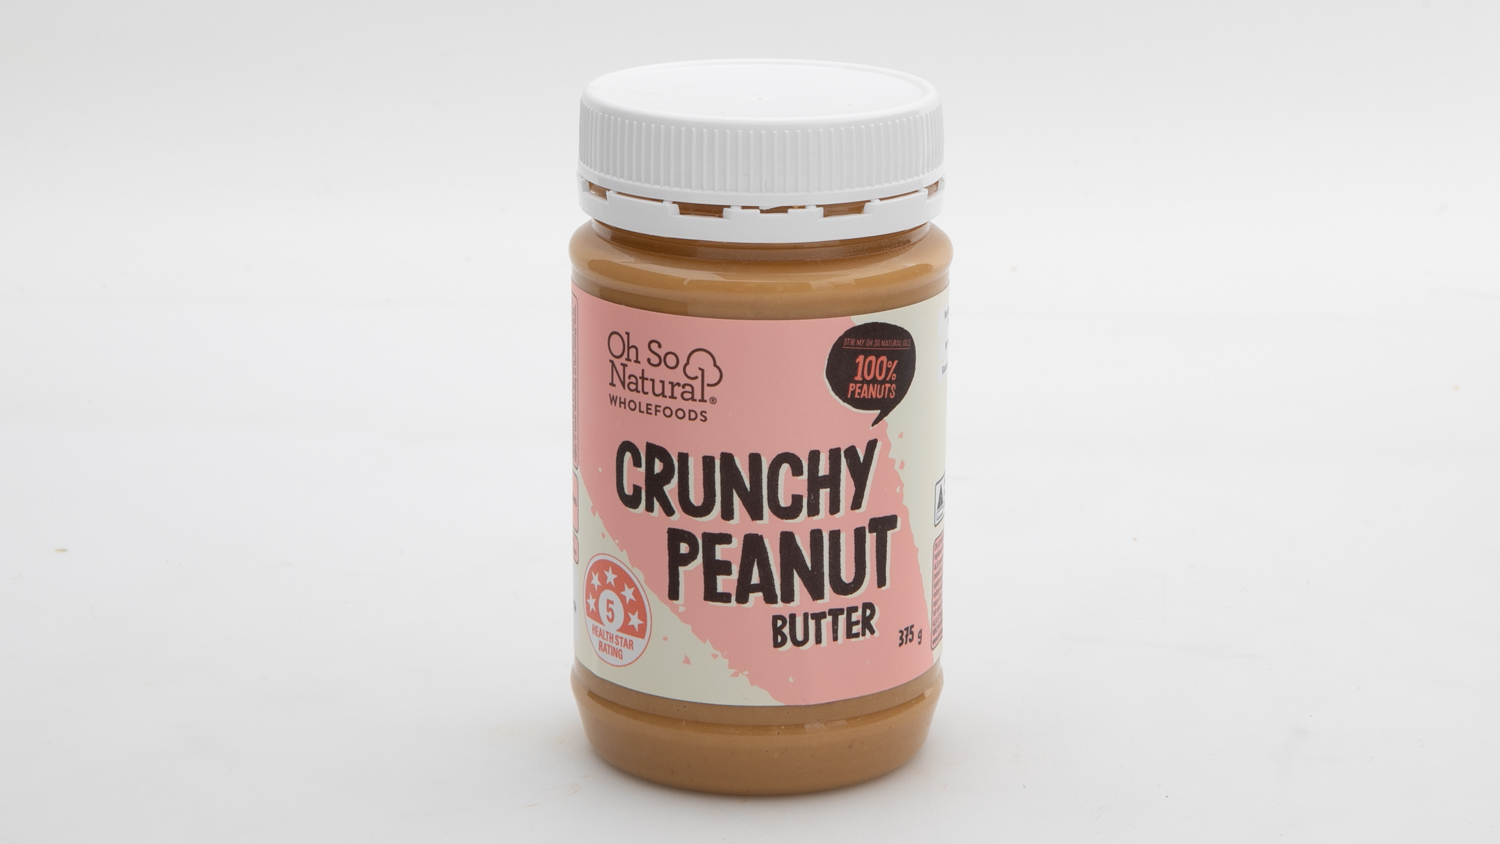 Aldi Oh So Natural Wholefoods Crunchy Peanut Butter carousel image